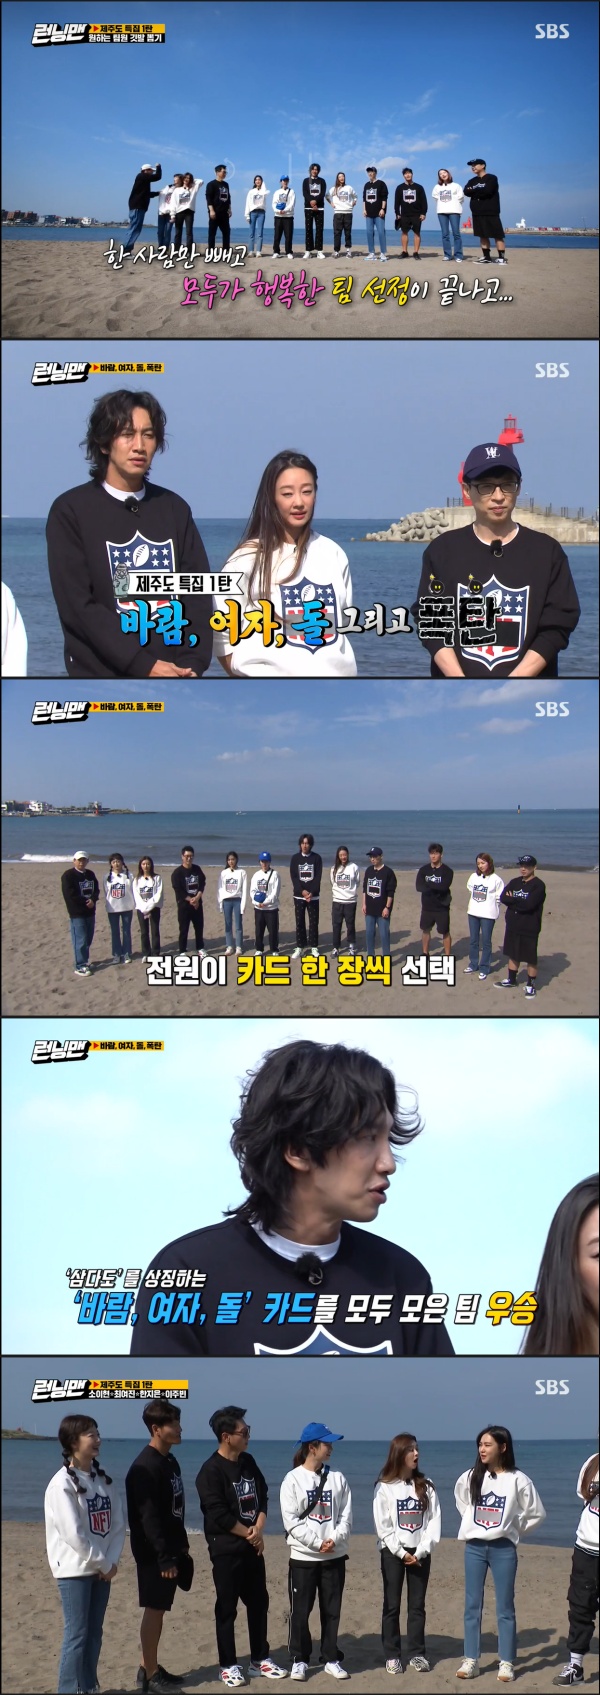 Yang Se-chan dislodged Choi Yeo-jinOn the first day of SBS Running Man, Han Ji Eun Soi Hyun Choi Yeo-jin Lee Joo Bin appeared as a guest.On the day of the show, the members who were moving to the car talked about Similiar. The members laughed at Yoo Jae-Suk, saying, It seems like anchovy.Yang Se-chan explained, The aftershock resembles a little Halibut, and Choi Yeo-jin, who heard it, said, If you are going to say this, do something pretty.Yoo Jae-Suk described the somin resembles a mating kissingurami and Jeon So-min responded, Im just a doctor fish, Im going to eat everything.Choi Yeo-jin said Lee Ju-bin looks like a nimo and Yang Se-chan praised it for nimo fitting in.Jeon So-min advised Yang Se-chan, who is shy, Do not say Nimo is good together alone, but do such a big thing.On the other hand, SBS Running Man is broadcast every Sunday at 5 pm.